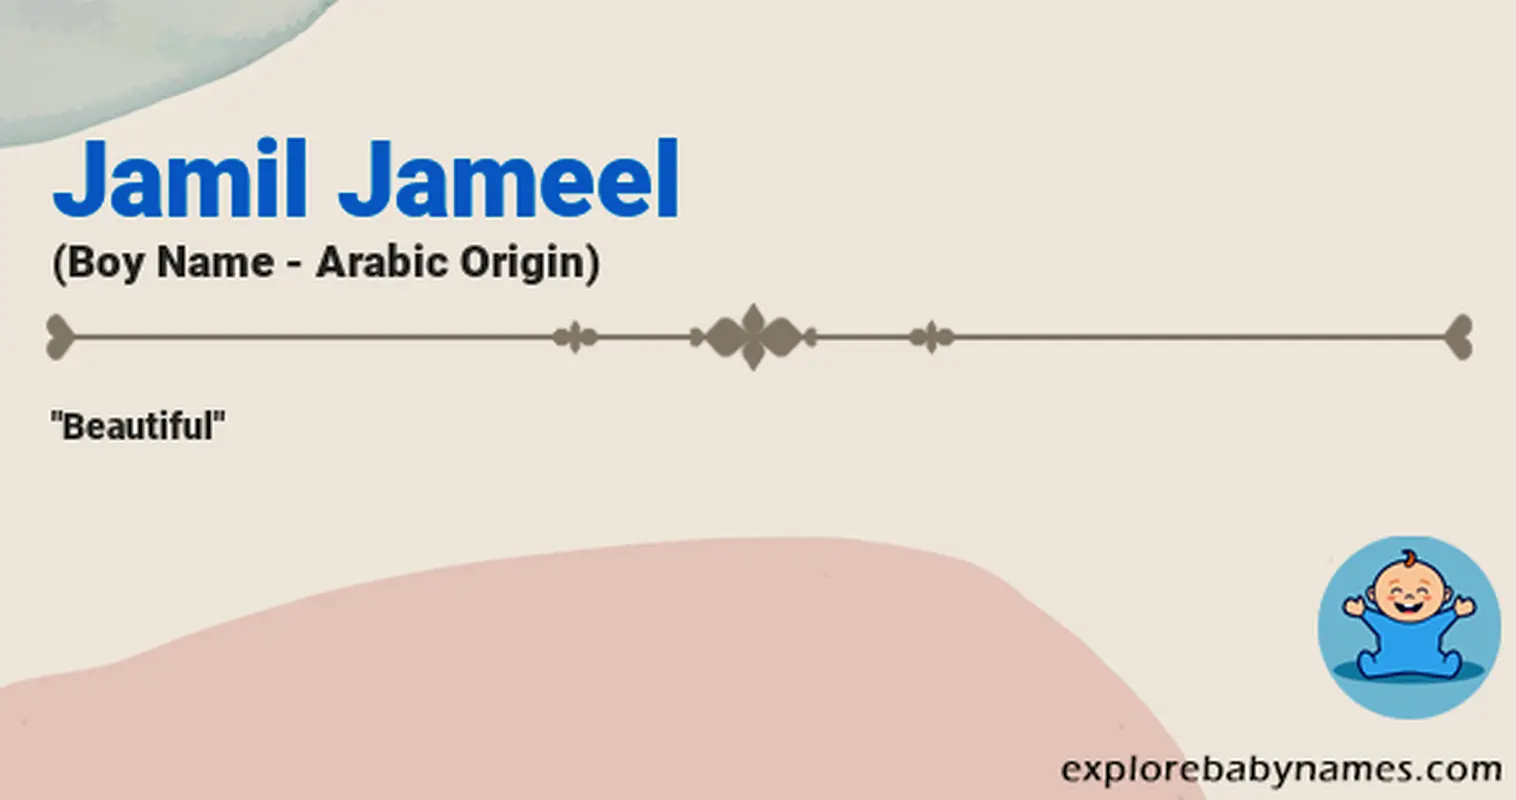 Meaning of Jamil Jameel